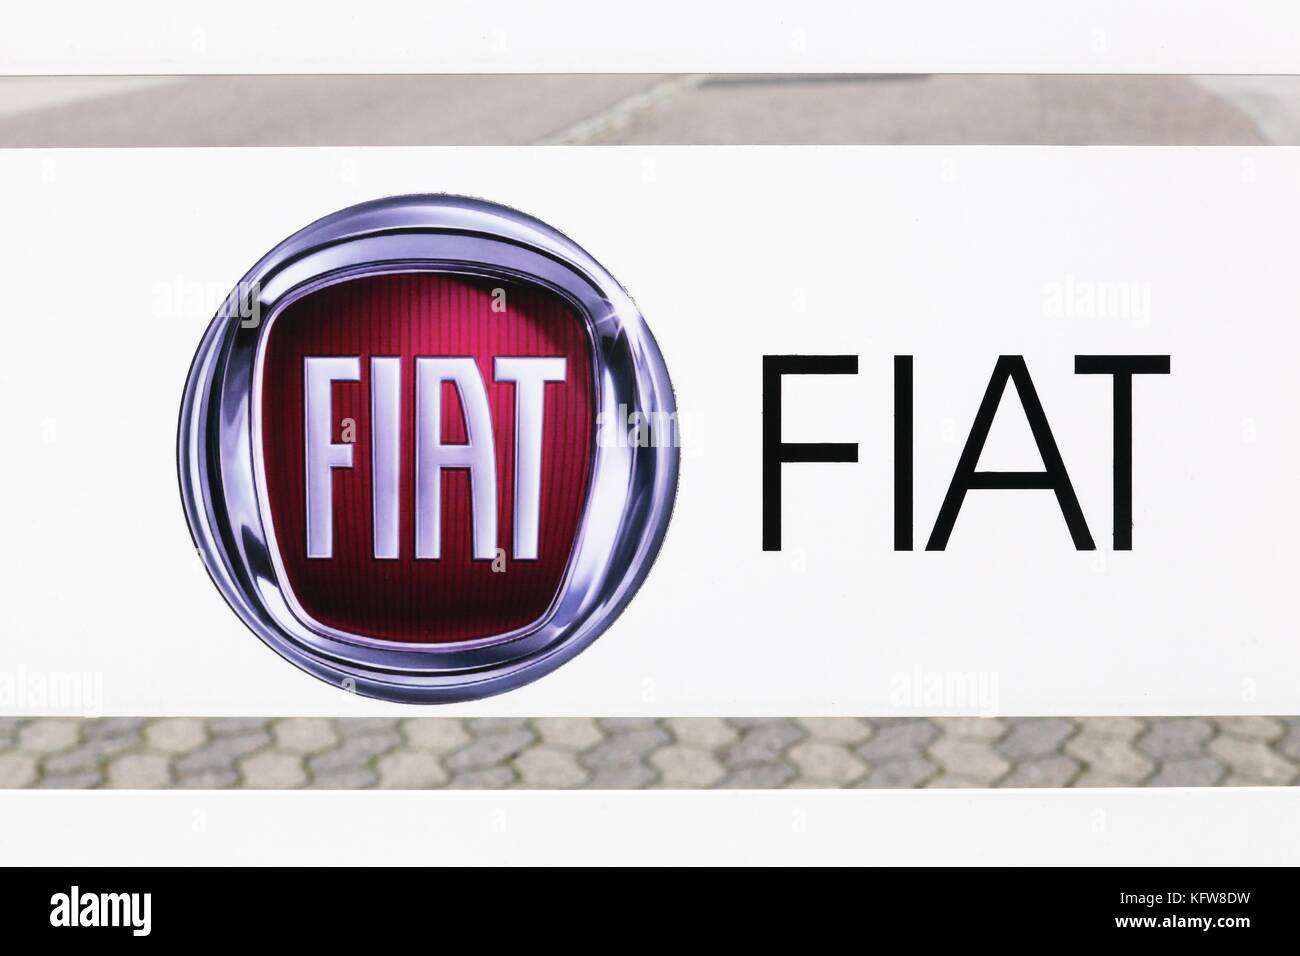 Skanderborg, Denmark - October 21, 2017: Fiat logo on a panel. Fiat is the largest automobile manufacturer in Italy Stock Photo